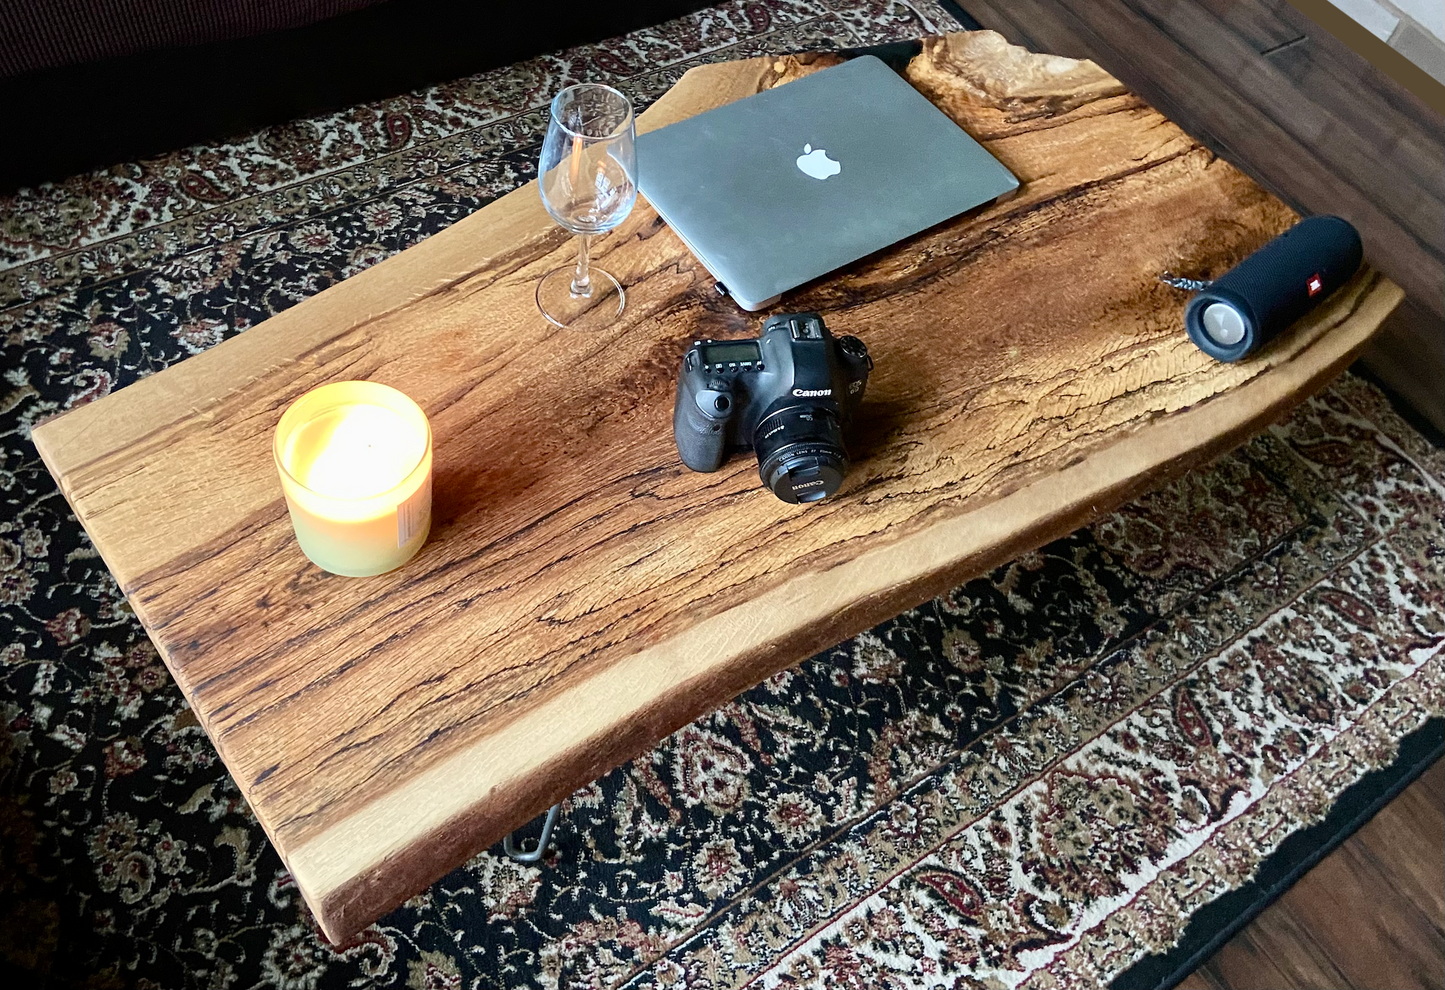  Live Edge Spalted White Oak Wood Coffee Table|Live Edge Oak Table|Rustic Natural Edge Hardwood Oak|Forked Coffee Table|RusticFarmhouse Table